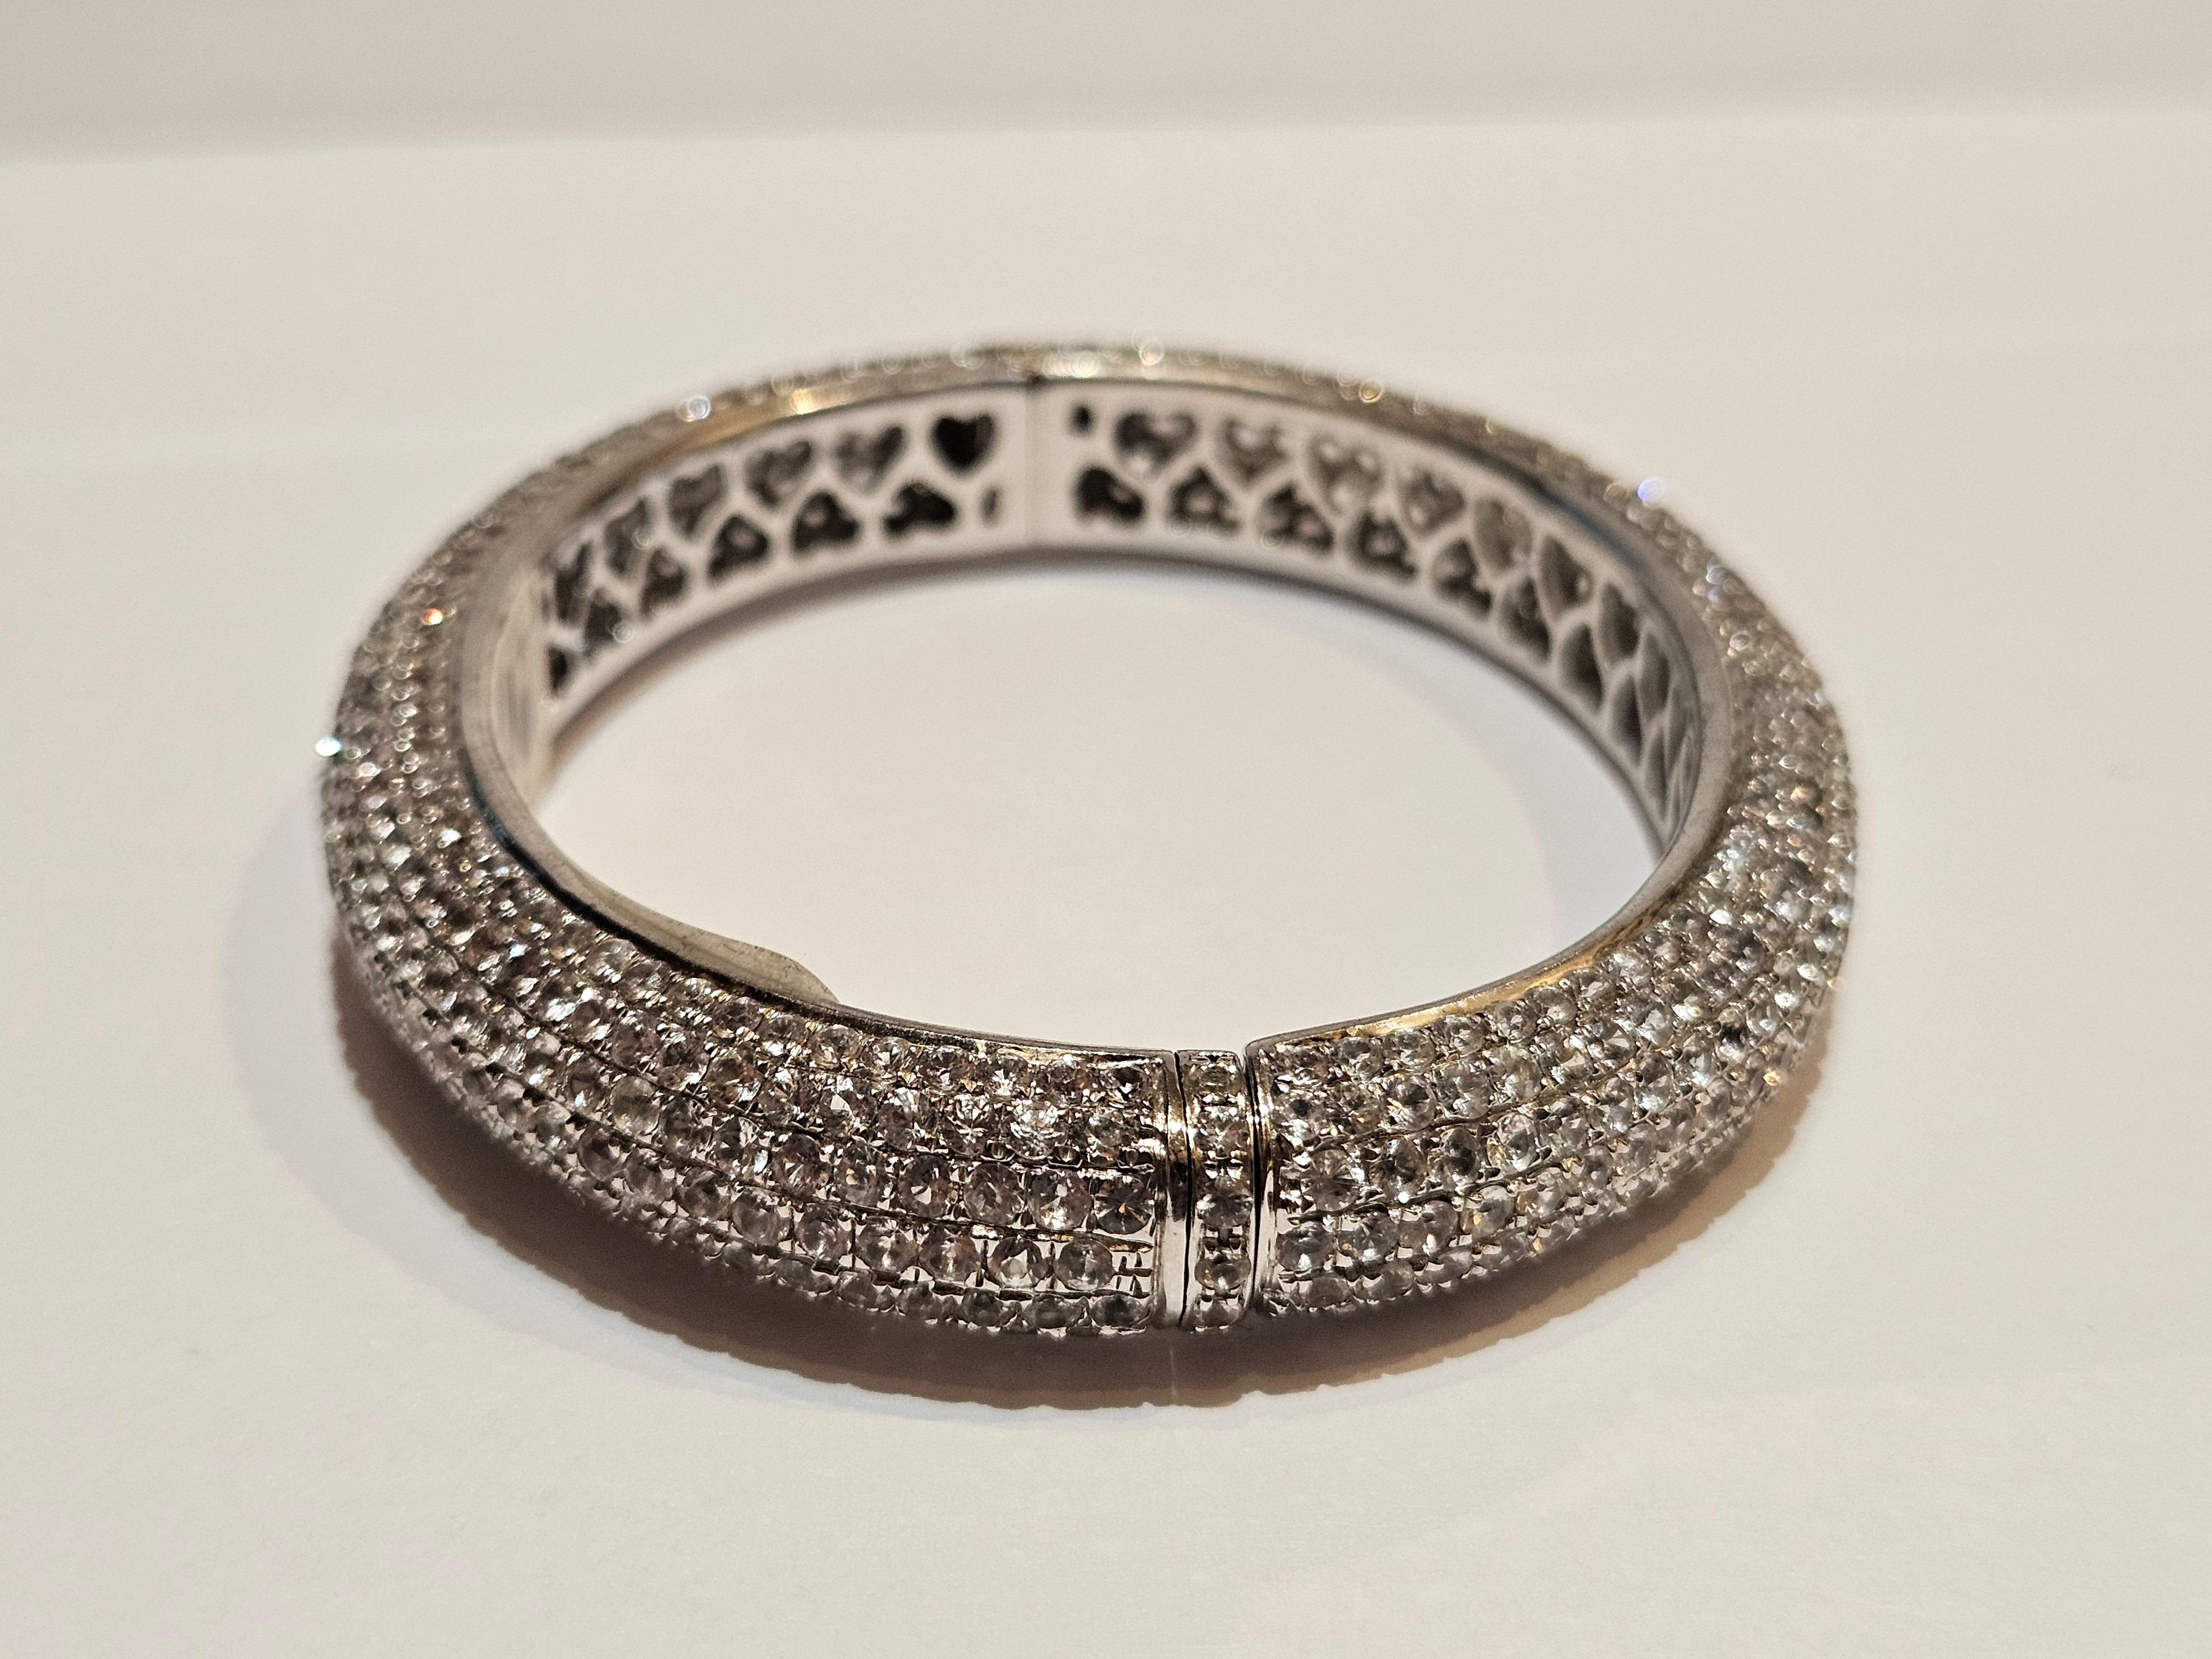 Mixed Cut NWT $7, 200 Fancy Glittering 25CT White Sapphire Bracelet Bangle Cuff For Sale